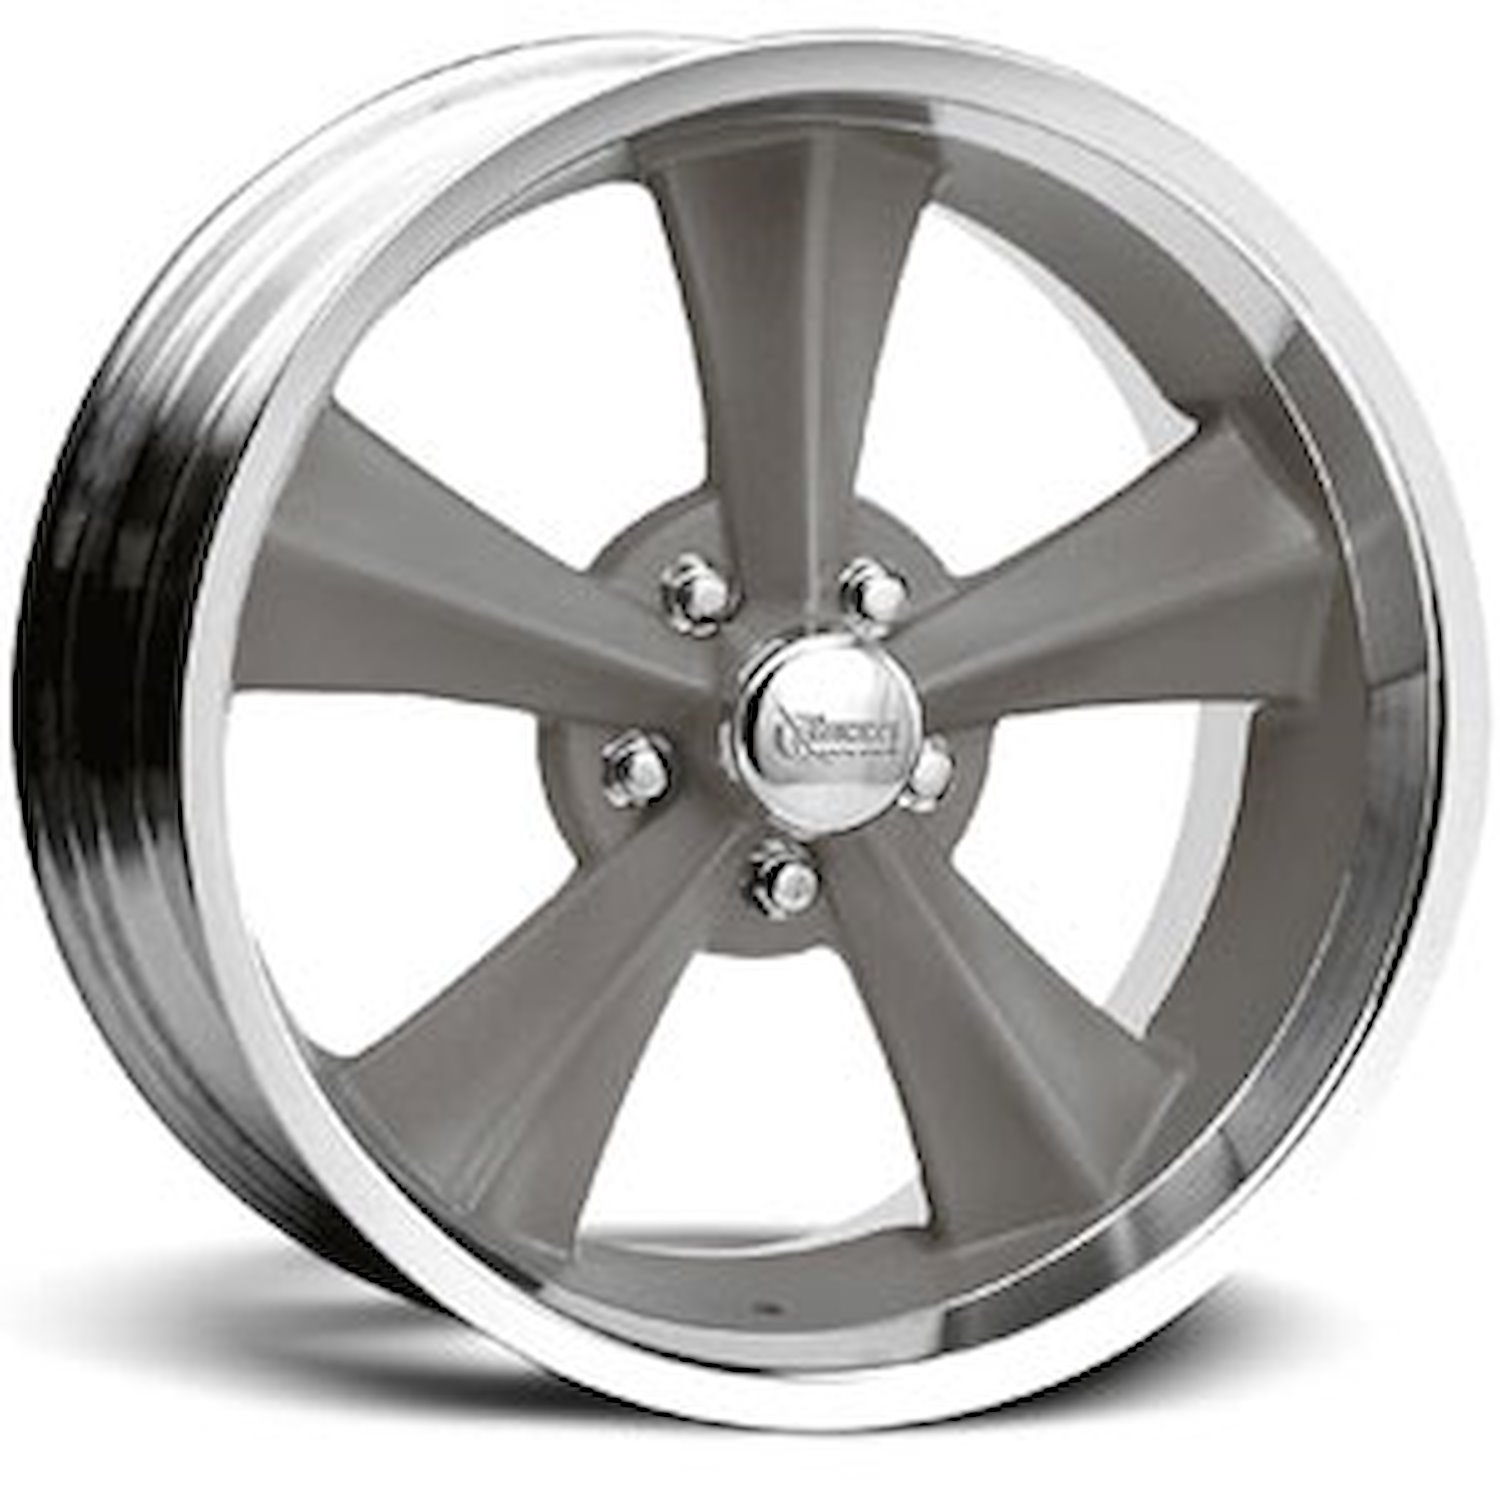 Booster Wheel - Gray Size: 17" x 8"